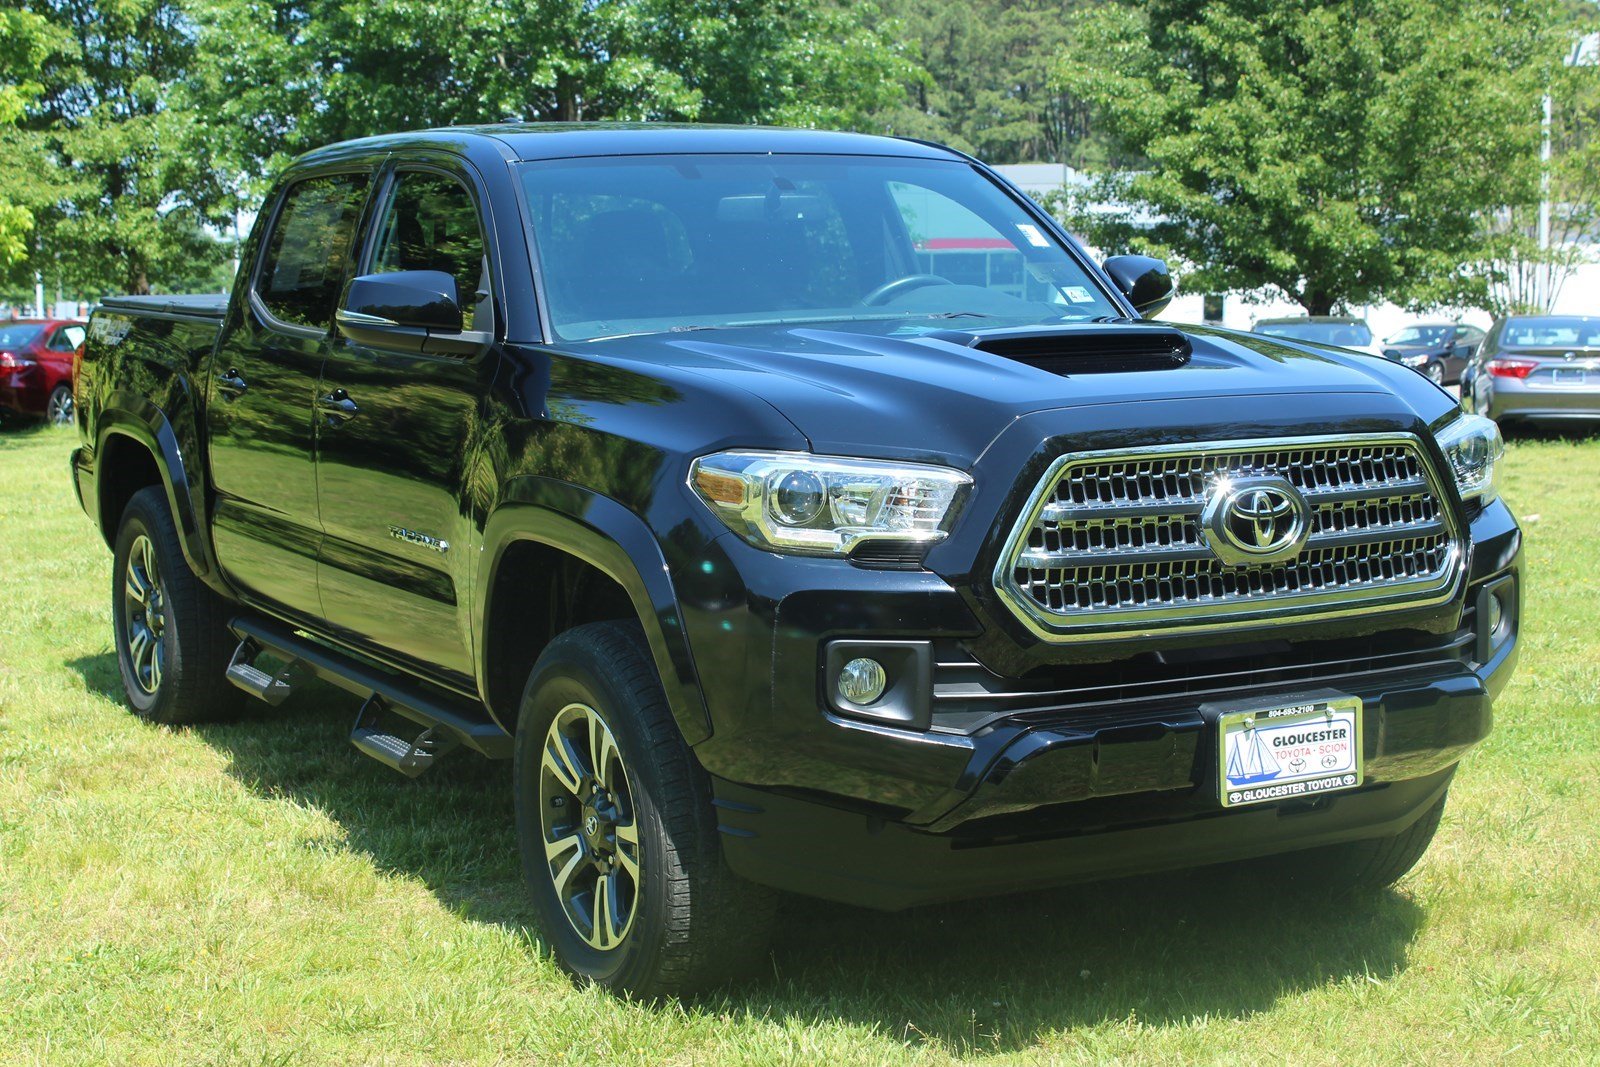 Pre-Owned 2016 Toyota Tacoma TRD Sport Crew Cab Pickup in Gloucester #